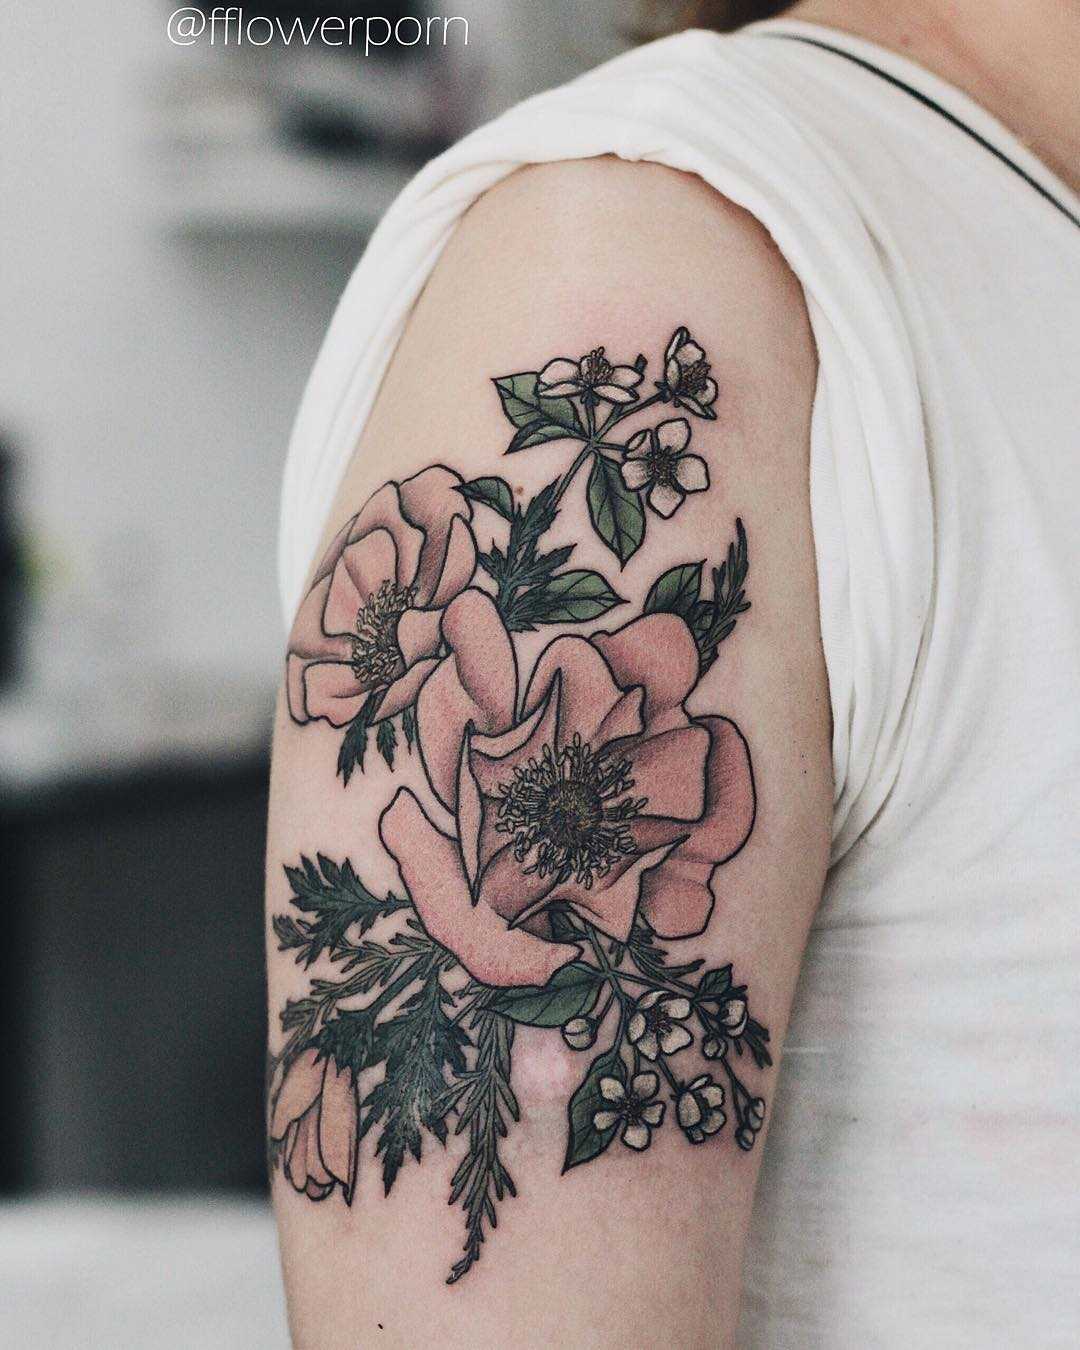 Anemones, apple blossoms, and rosemary tattoo